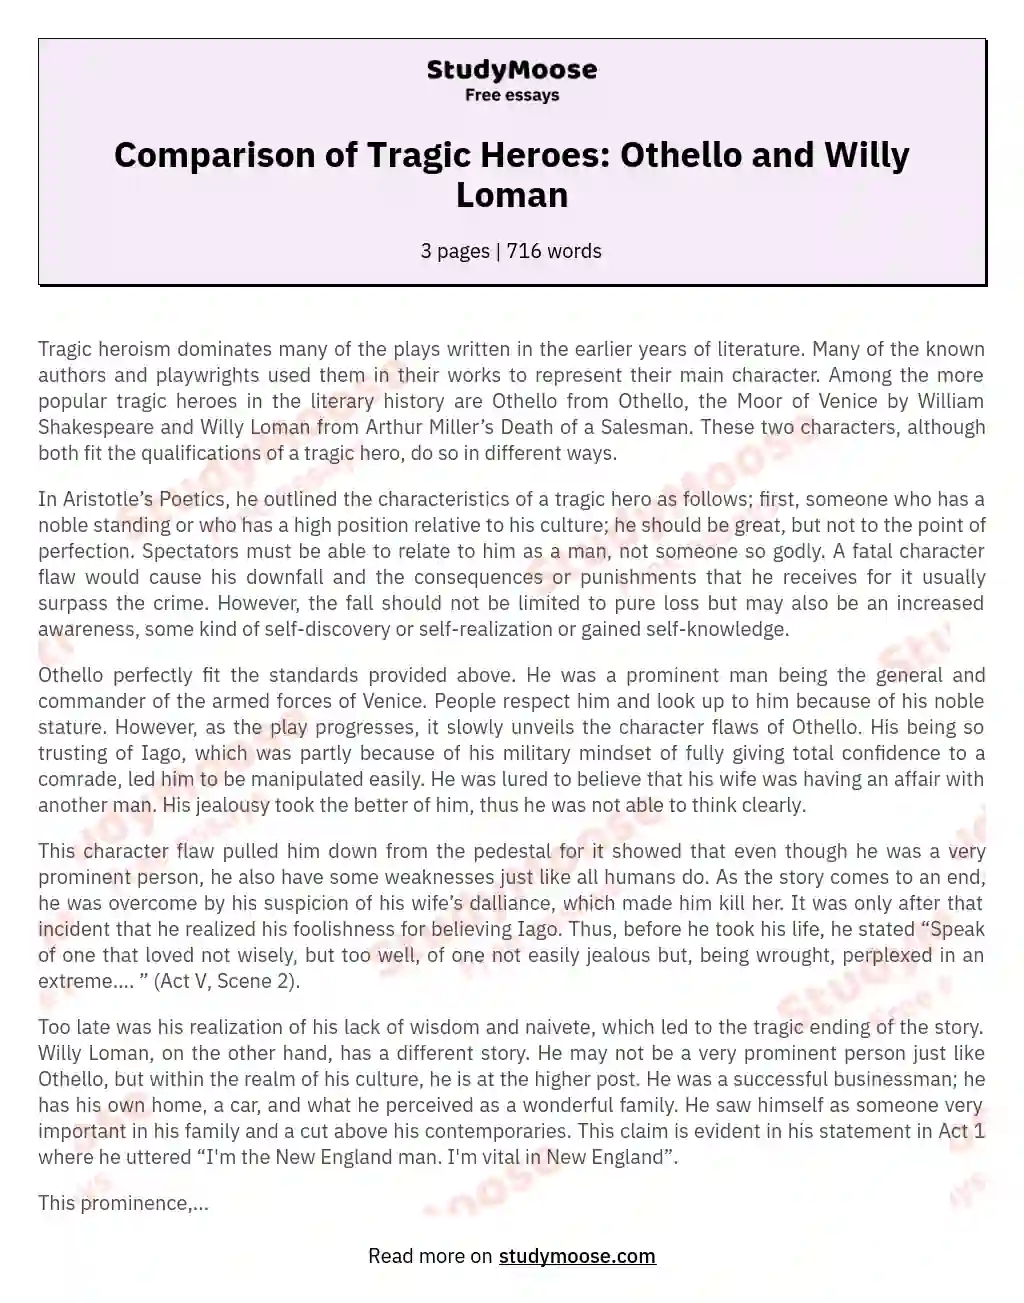 Comparison of Tragic Heroes: Othello and Willy Loman essay